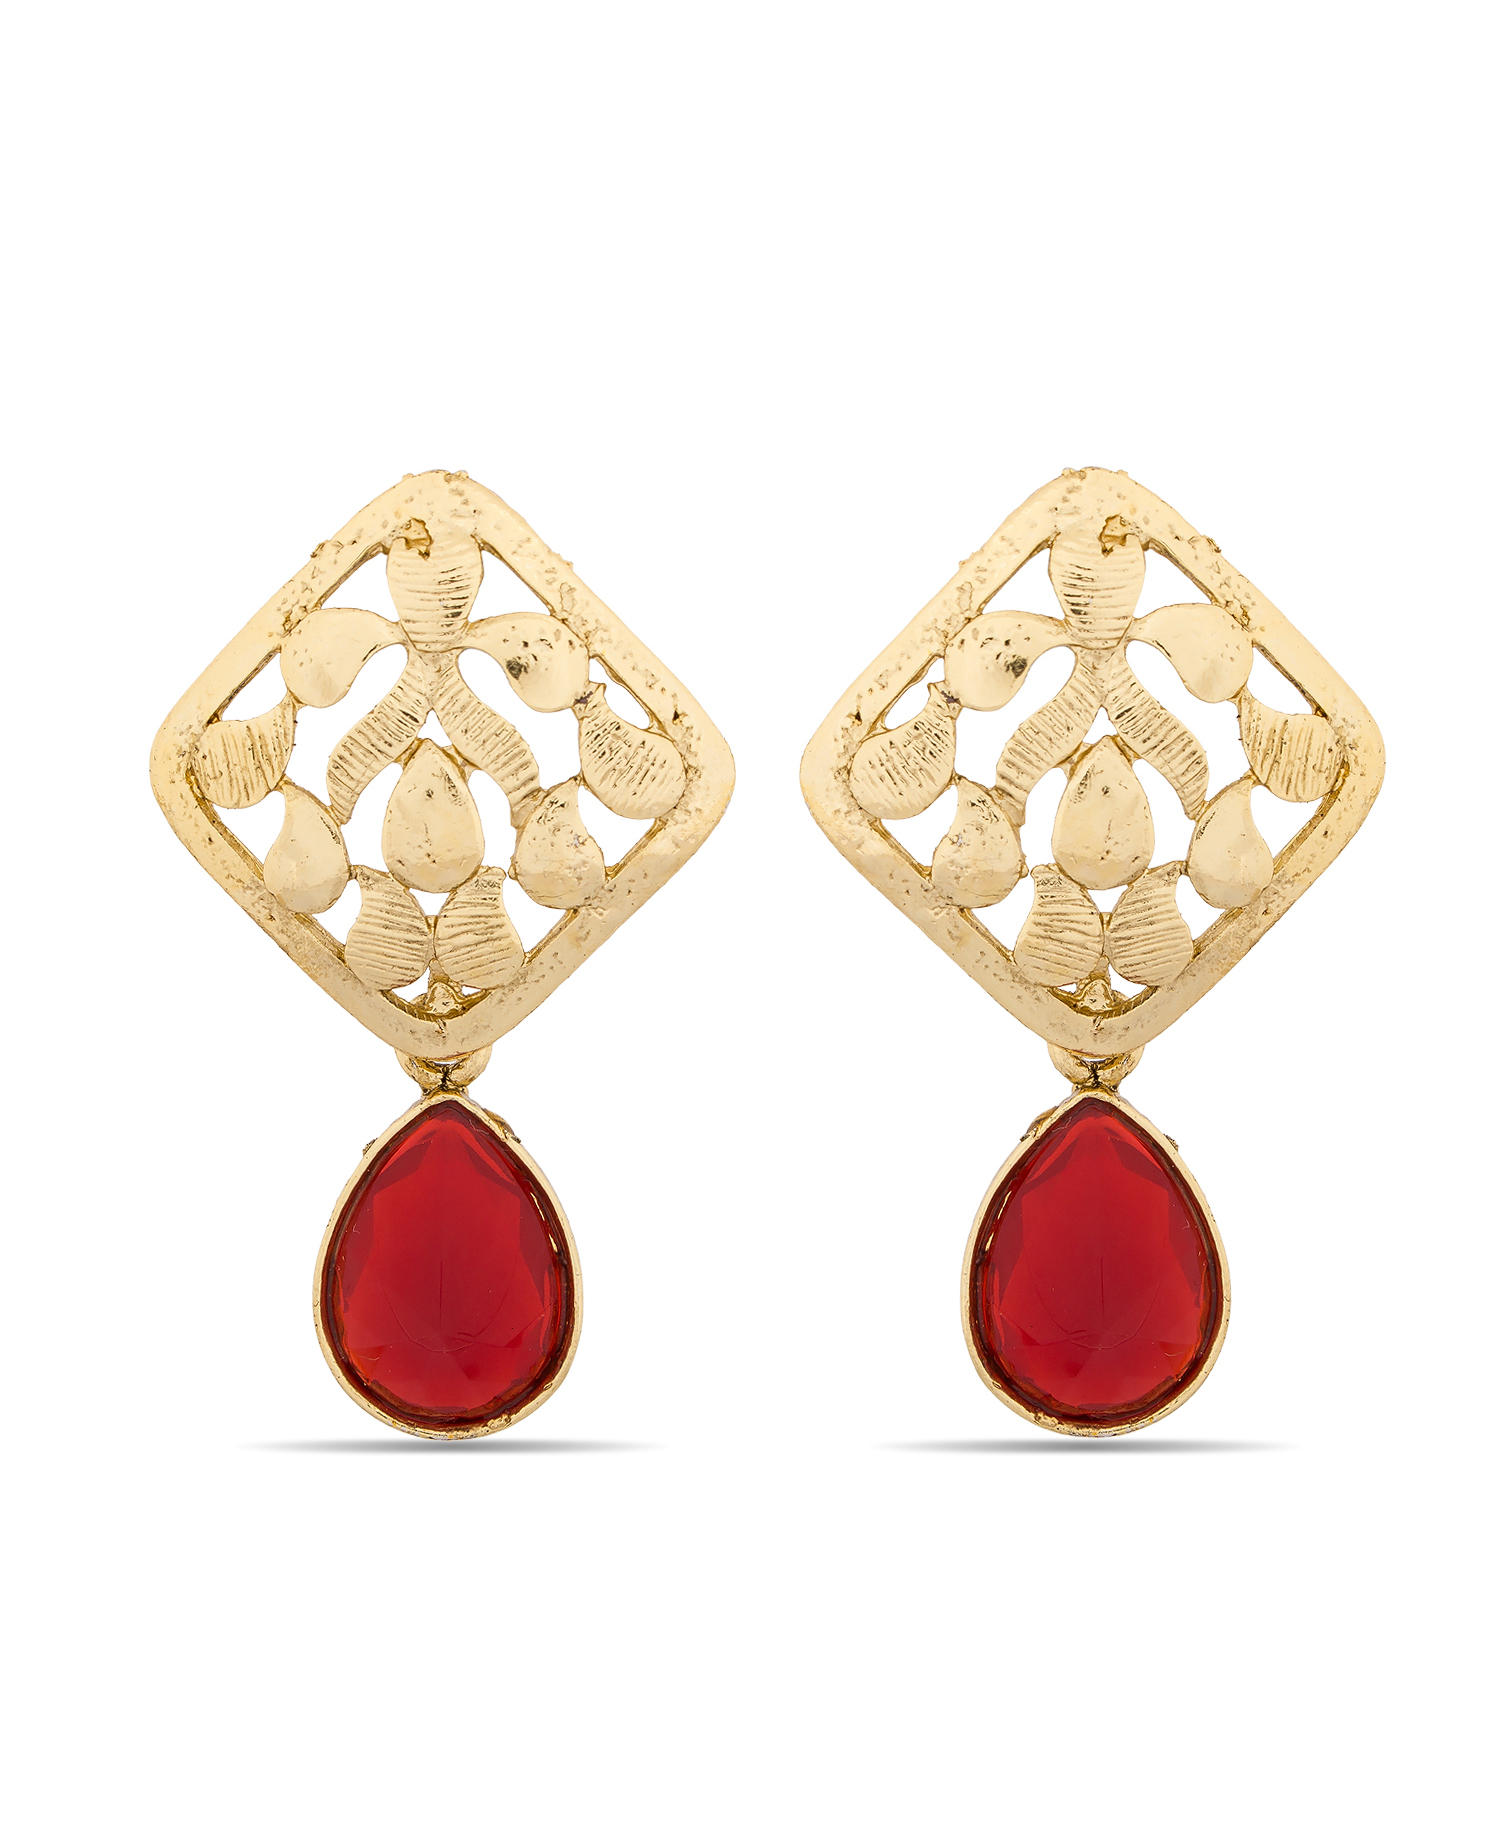 Red And Gold Non Precious Metal Stones, Crystals Drops